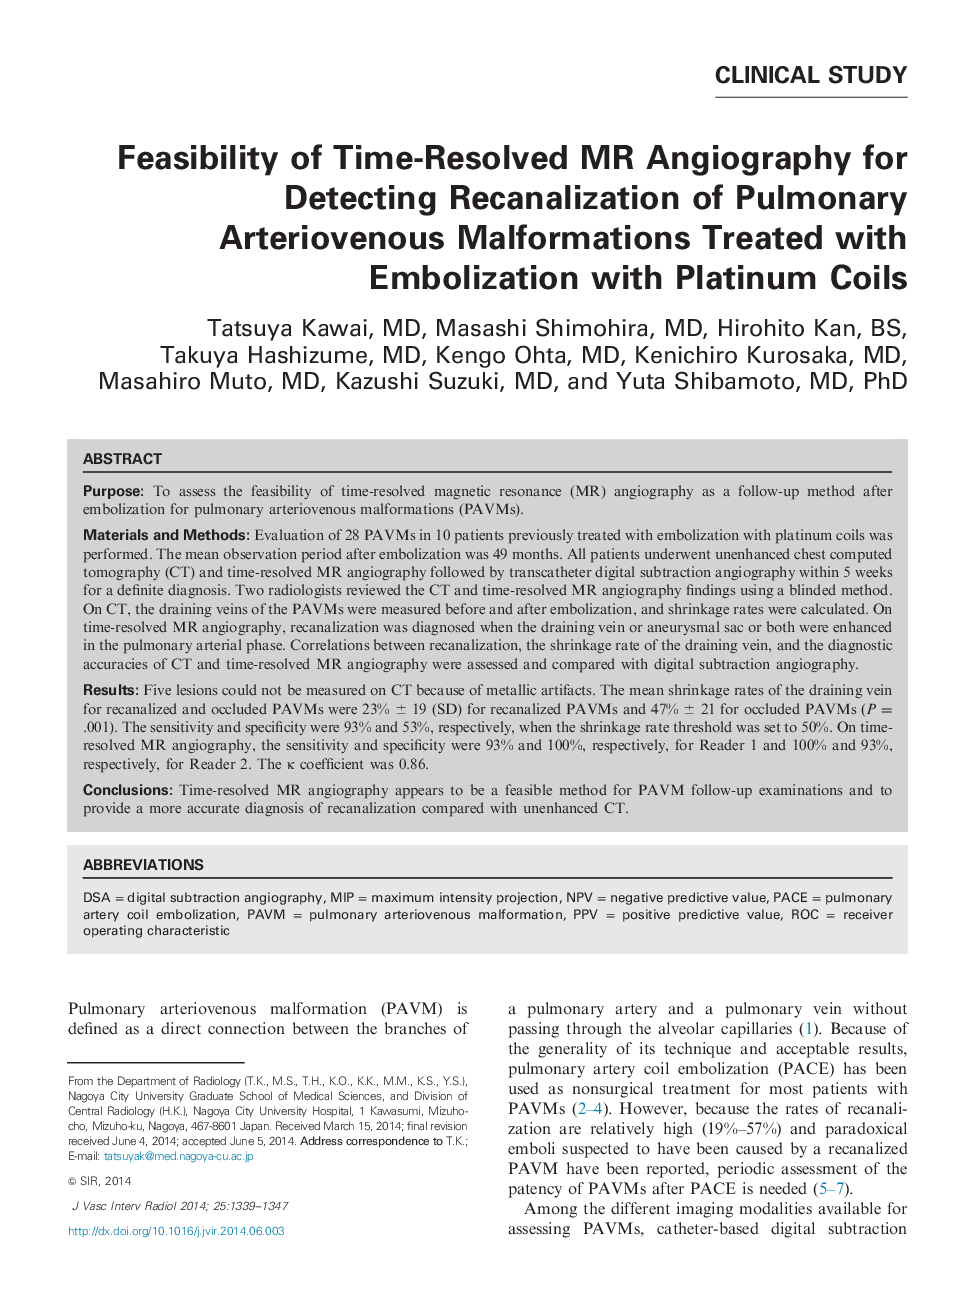 Feasibility of Time-Resolved MR Angiography for Detecting Recanalization of Pulmonary Arteriovenous Malformations Treated with Embolization with Platinum Coils